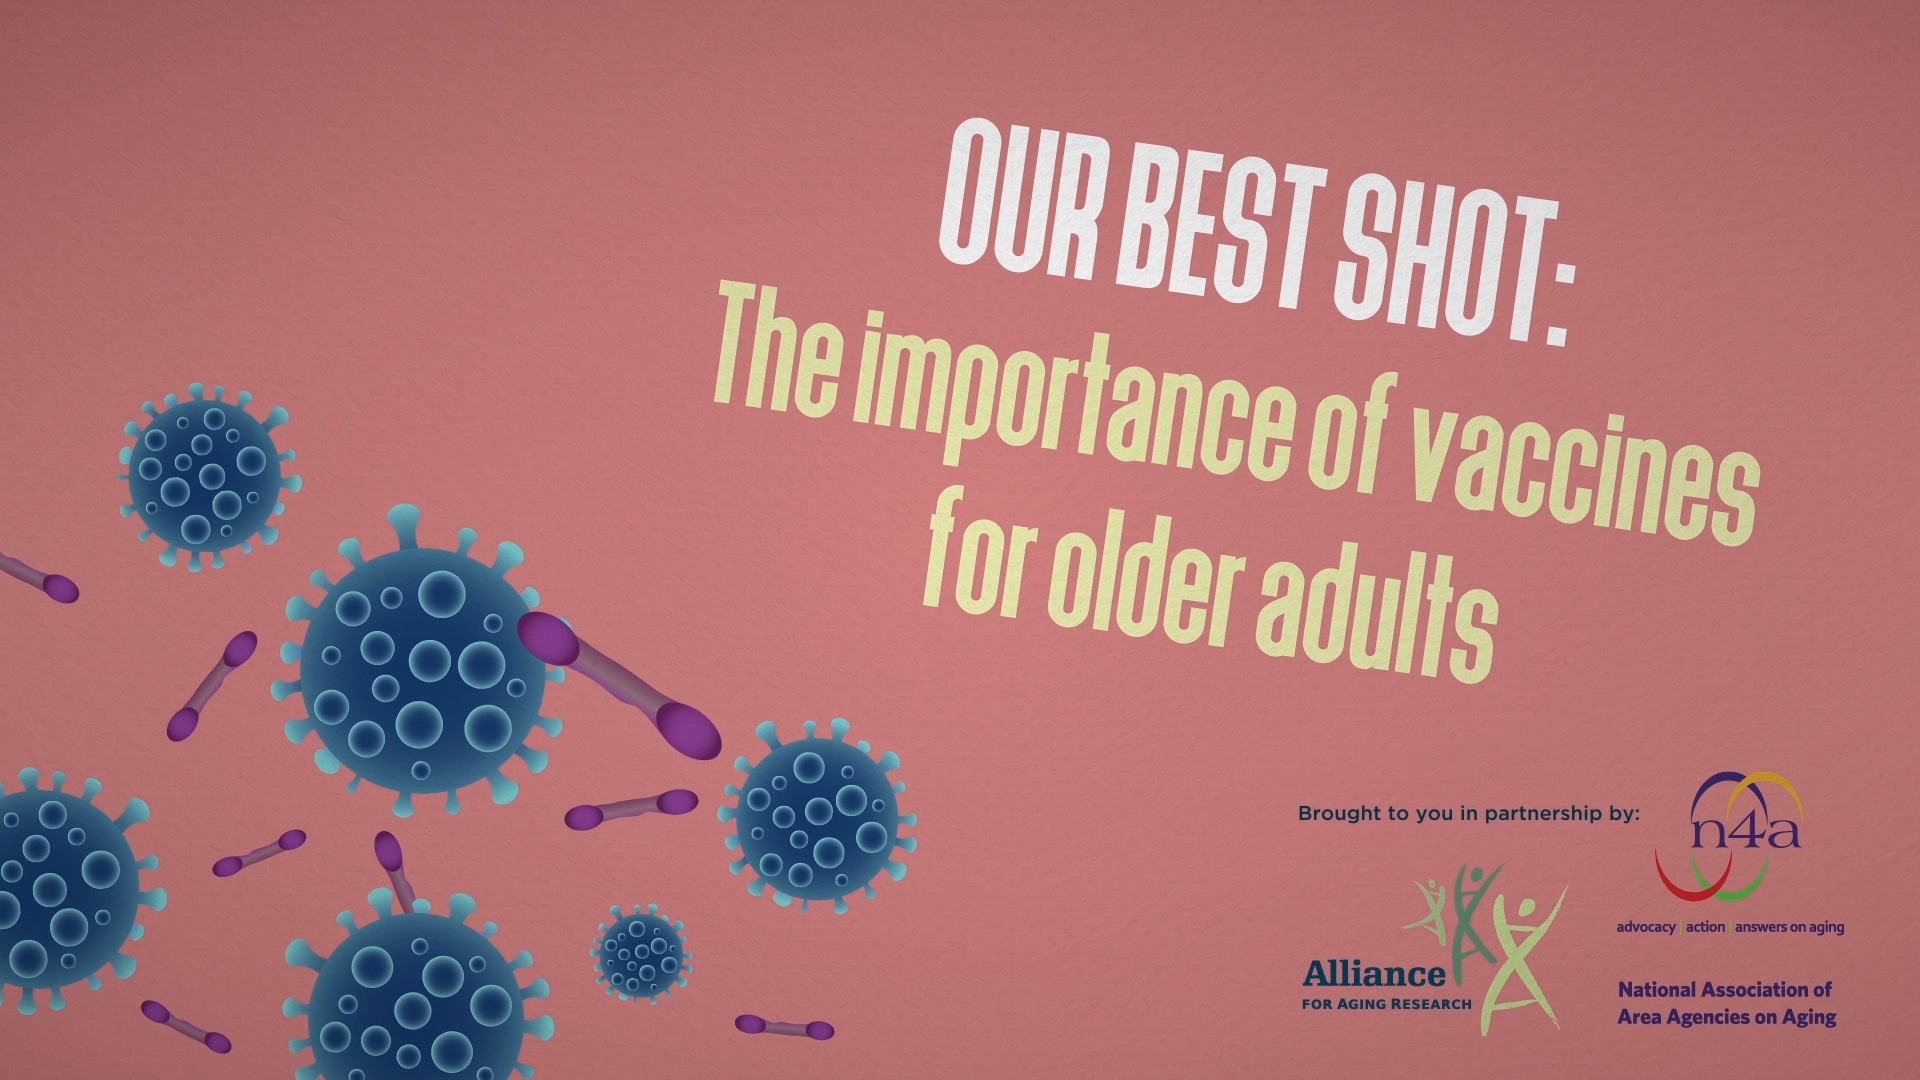 HROTW: Infographic Highlights Importance of Vaccines for Older Adults